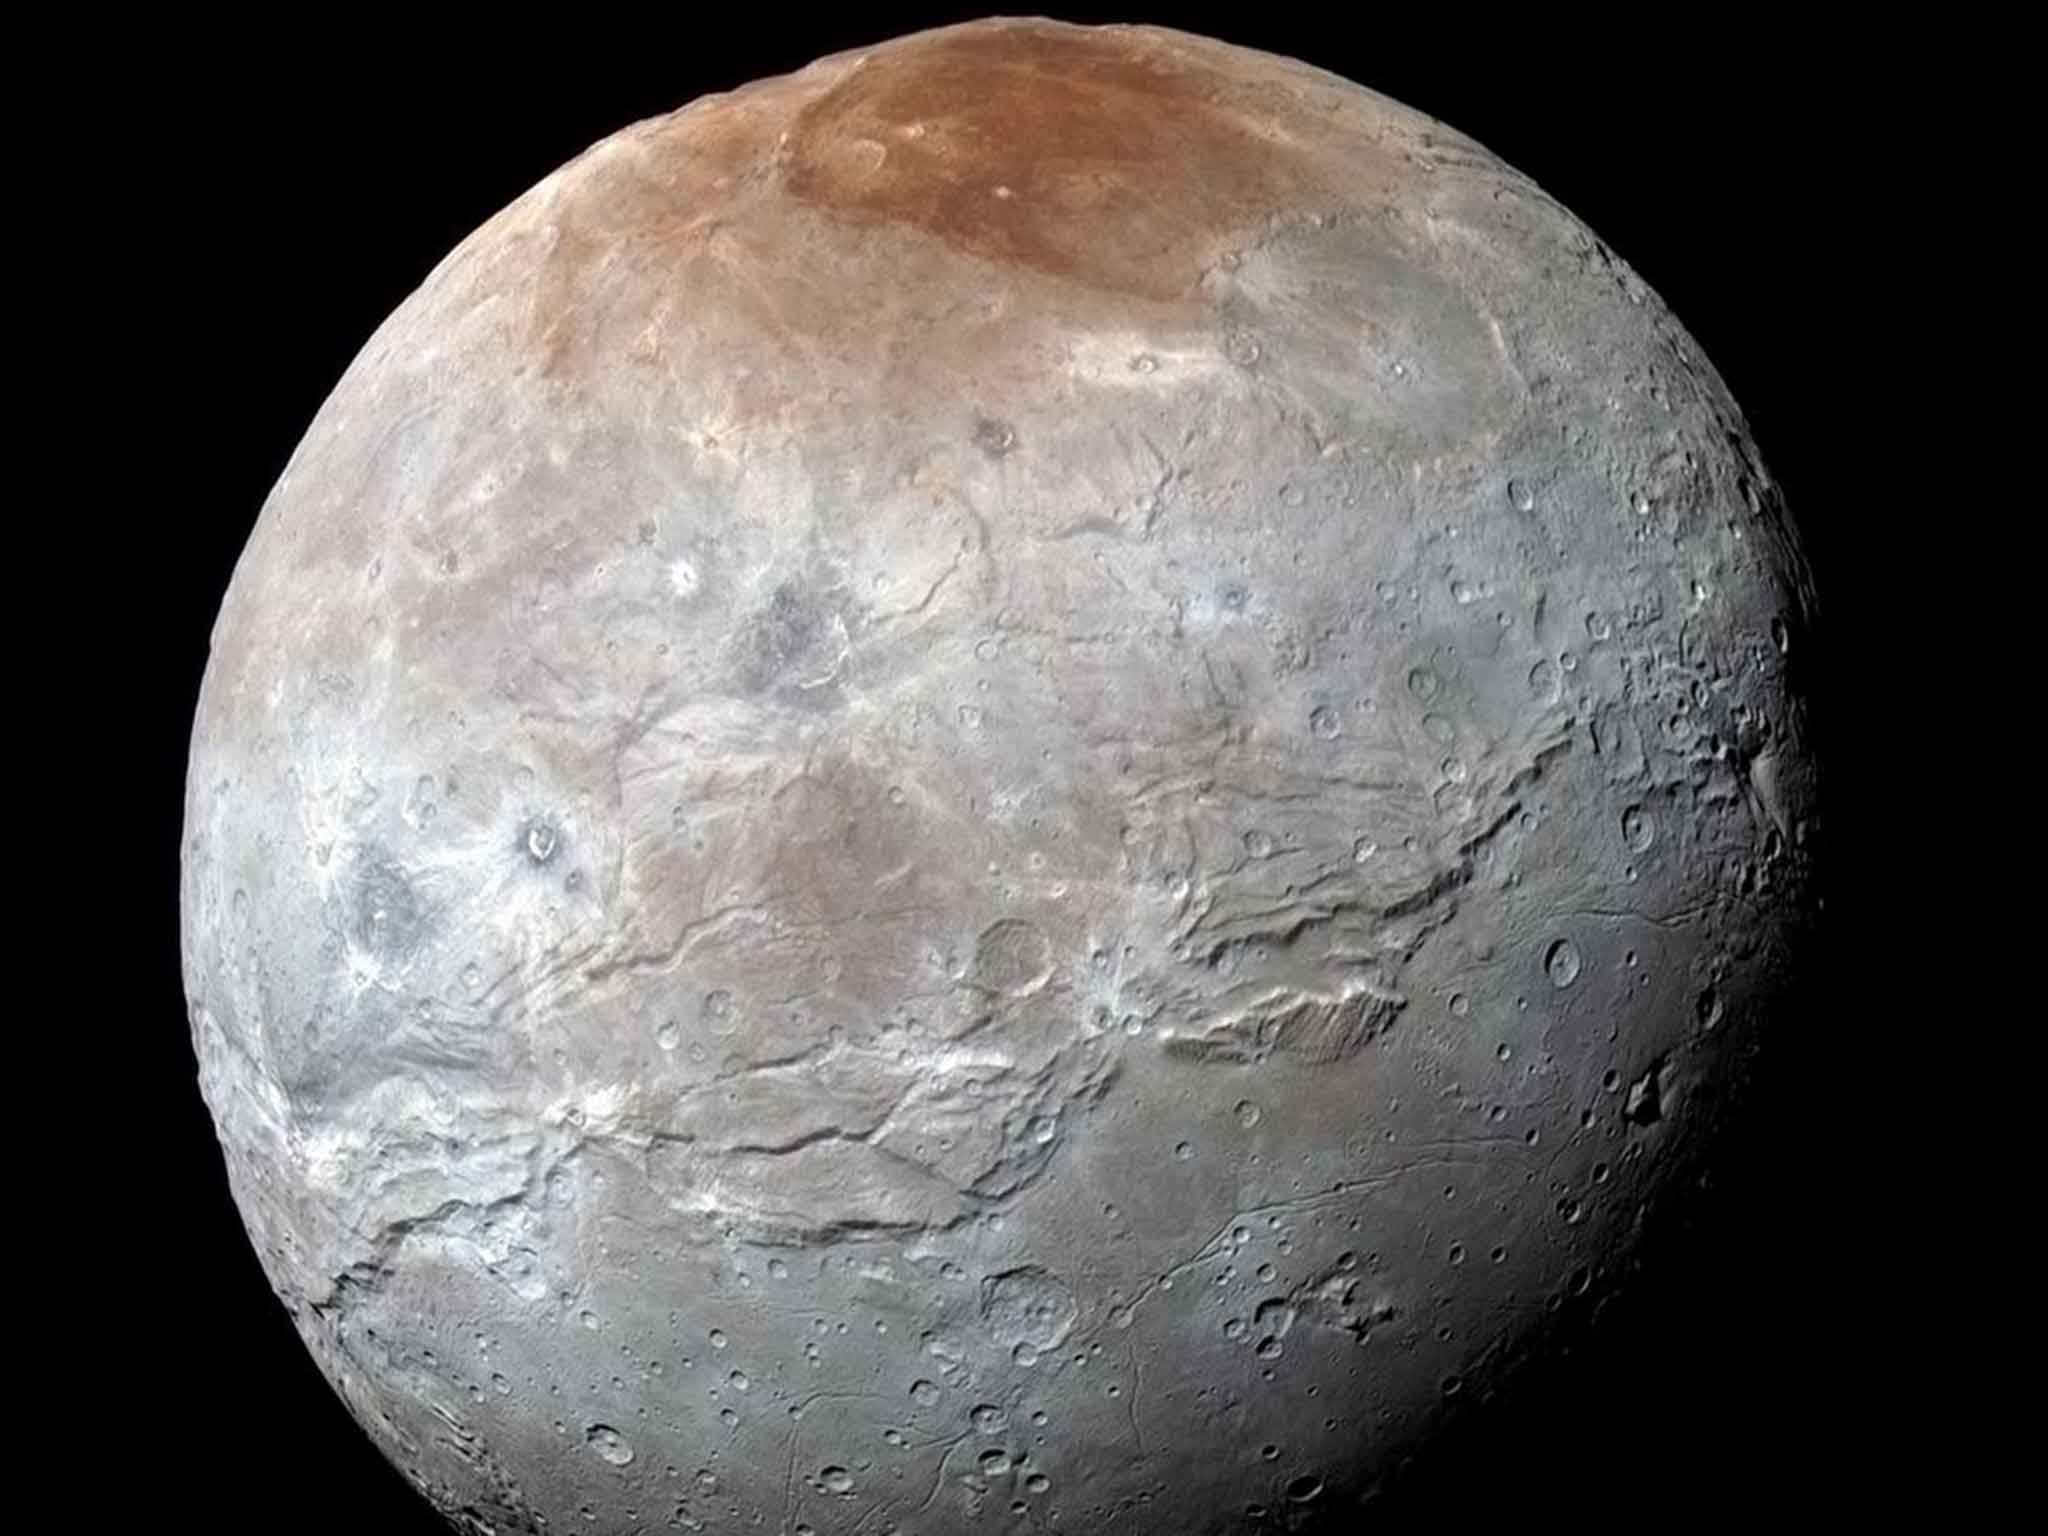 Charon has a huge fracture system, unlike anything seen on Pluto